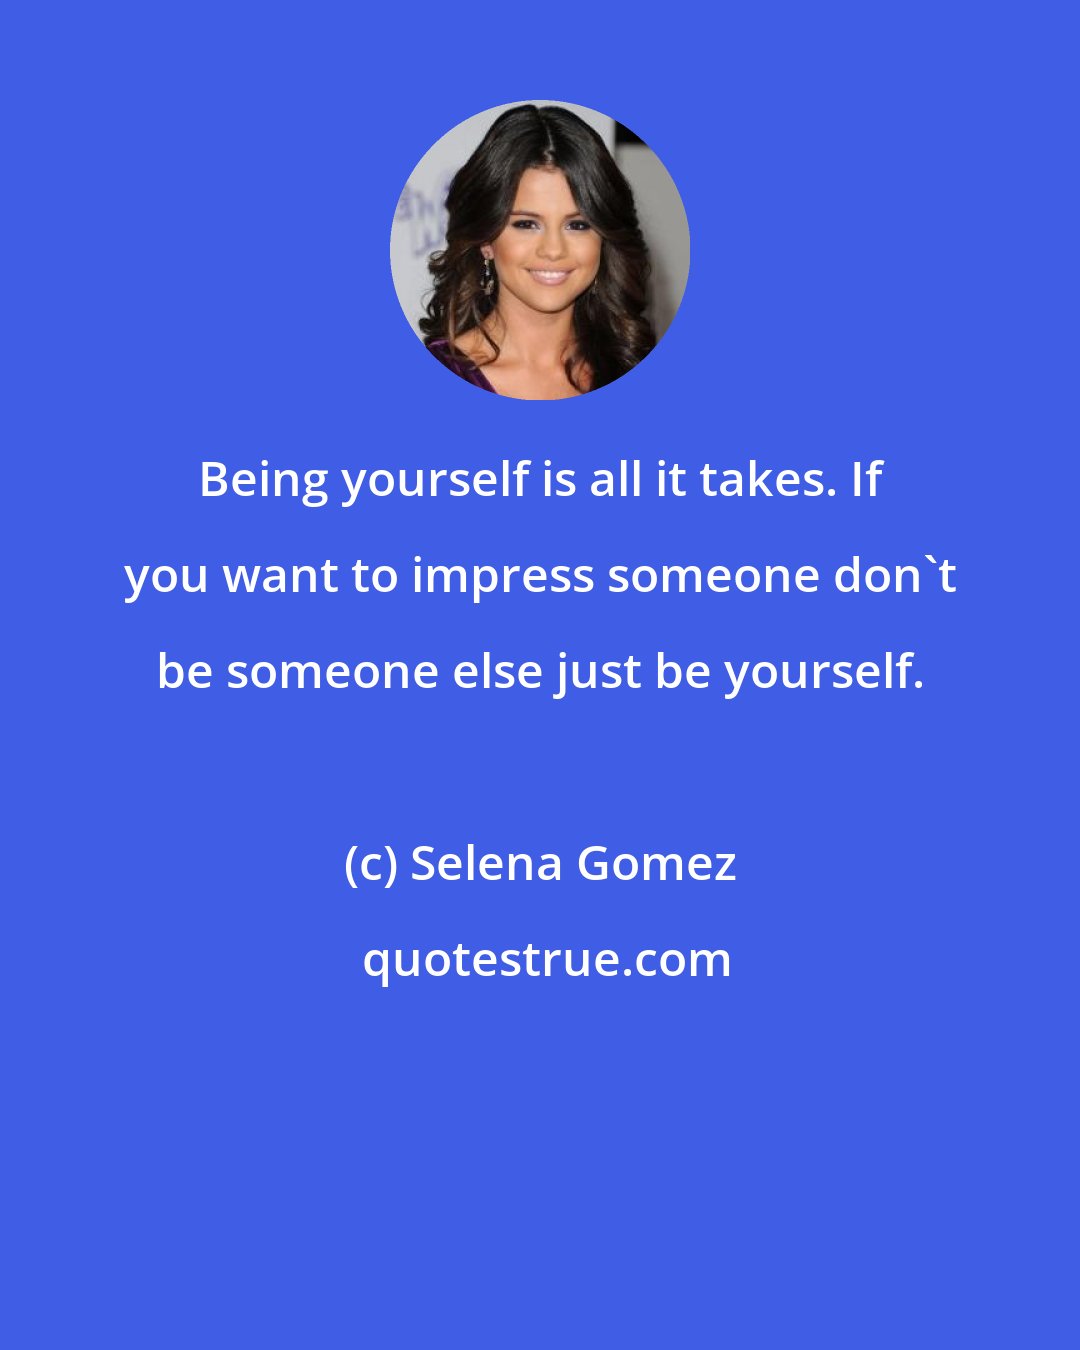 Selena Gomez: Being yourself is all it takes. If you want to impress someone don't be someone else just be yourself.